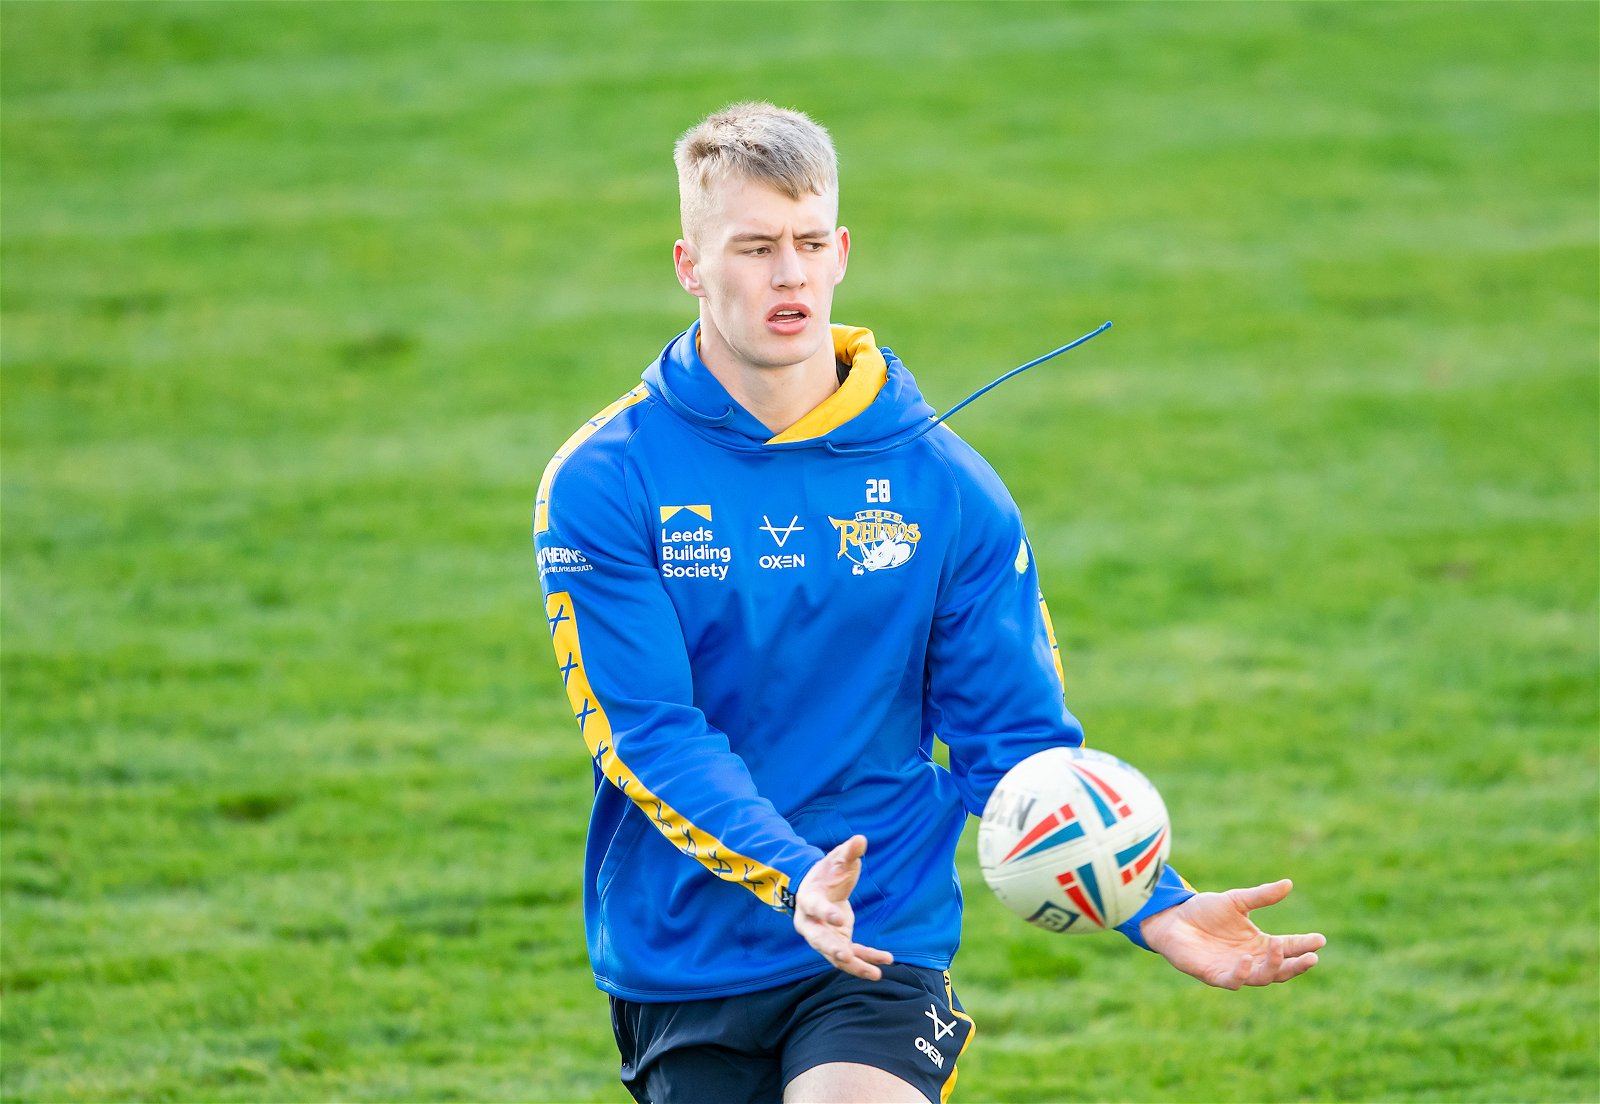 Max Simpson wearing a blue and yellow Leeds Rhinos hoodie while training. He is throwing the ball.